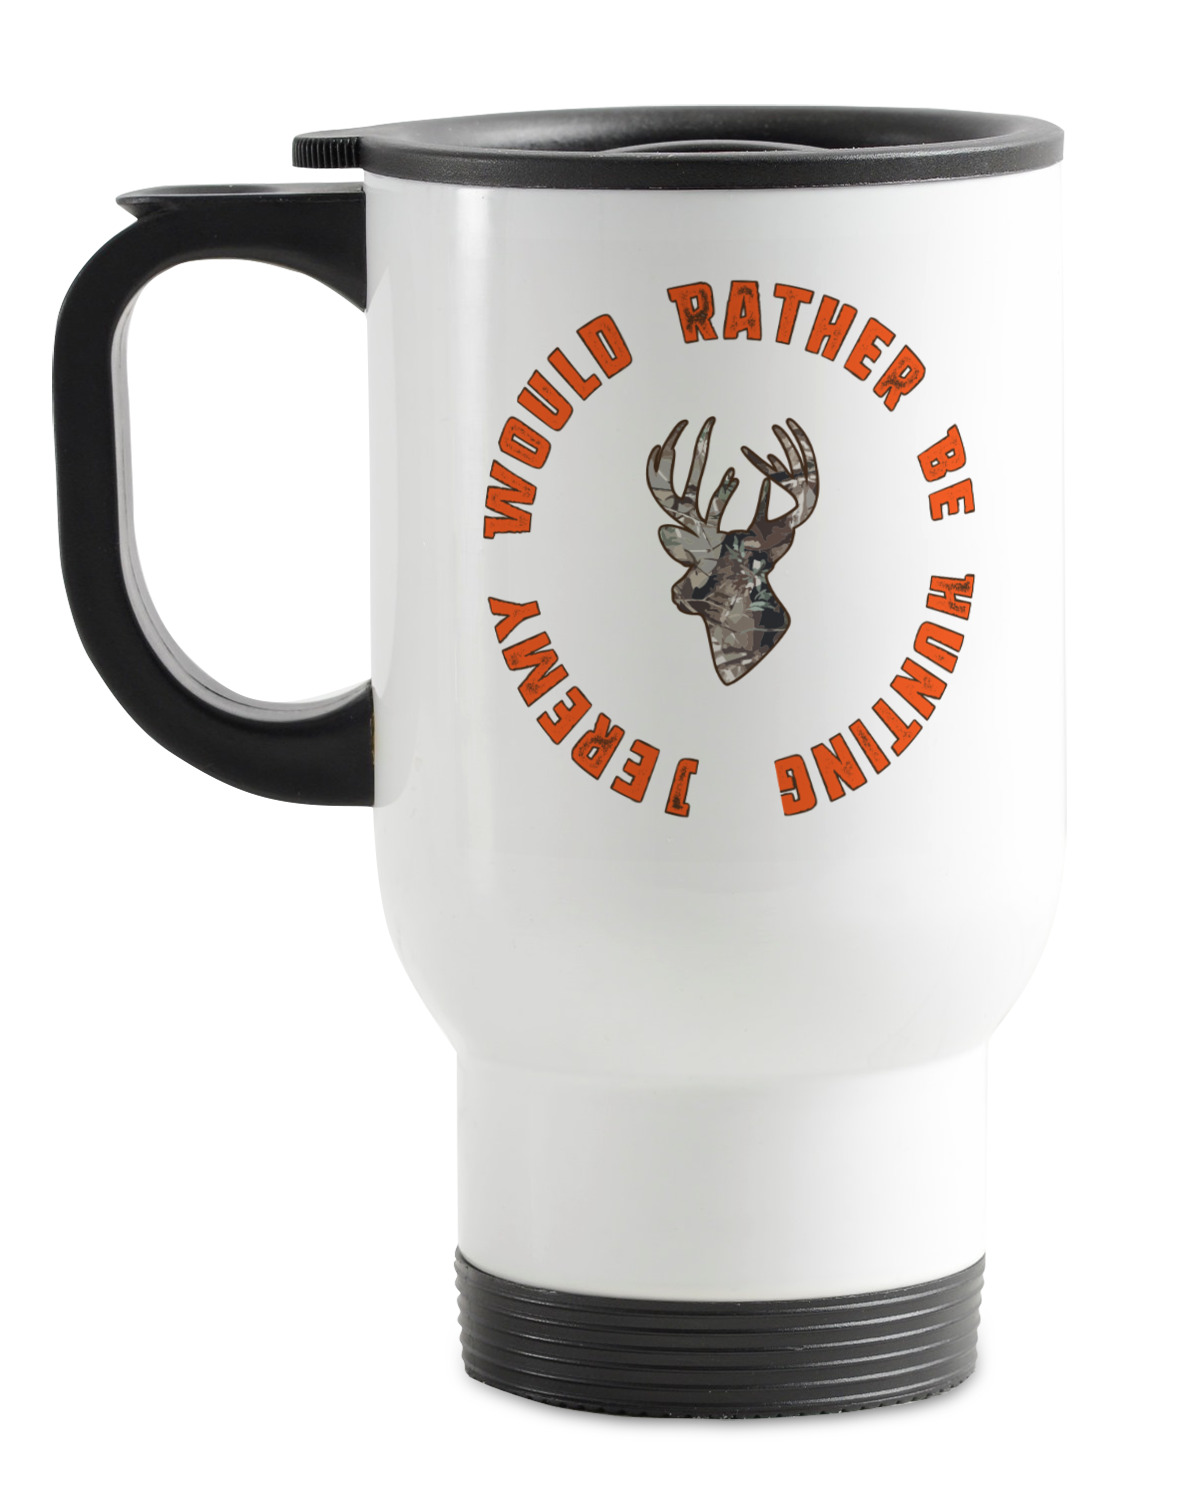 https://www.youcustomizeit.com/common/MAKE/2170399/Hunting-Camo-Stainless-Steel-Travel-Mug-with-Handle.jpg?lm=1670304317